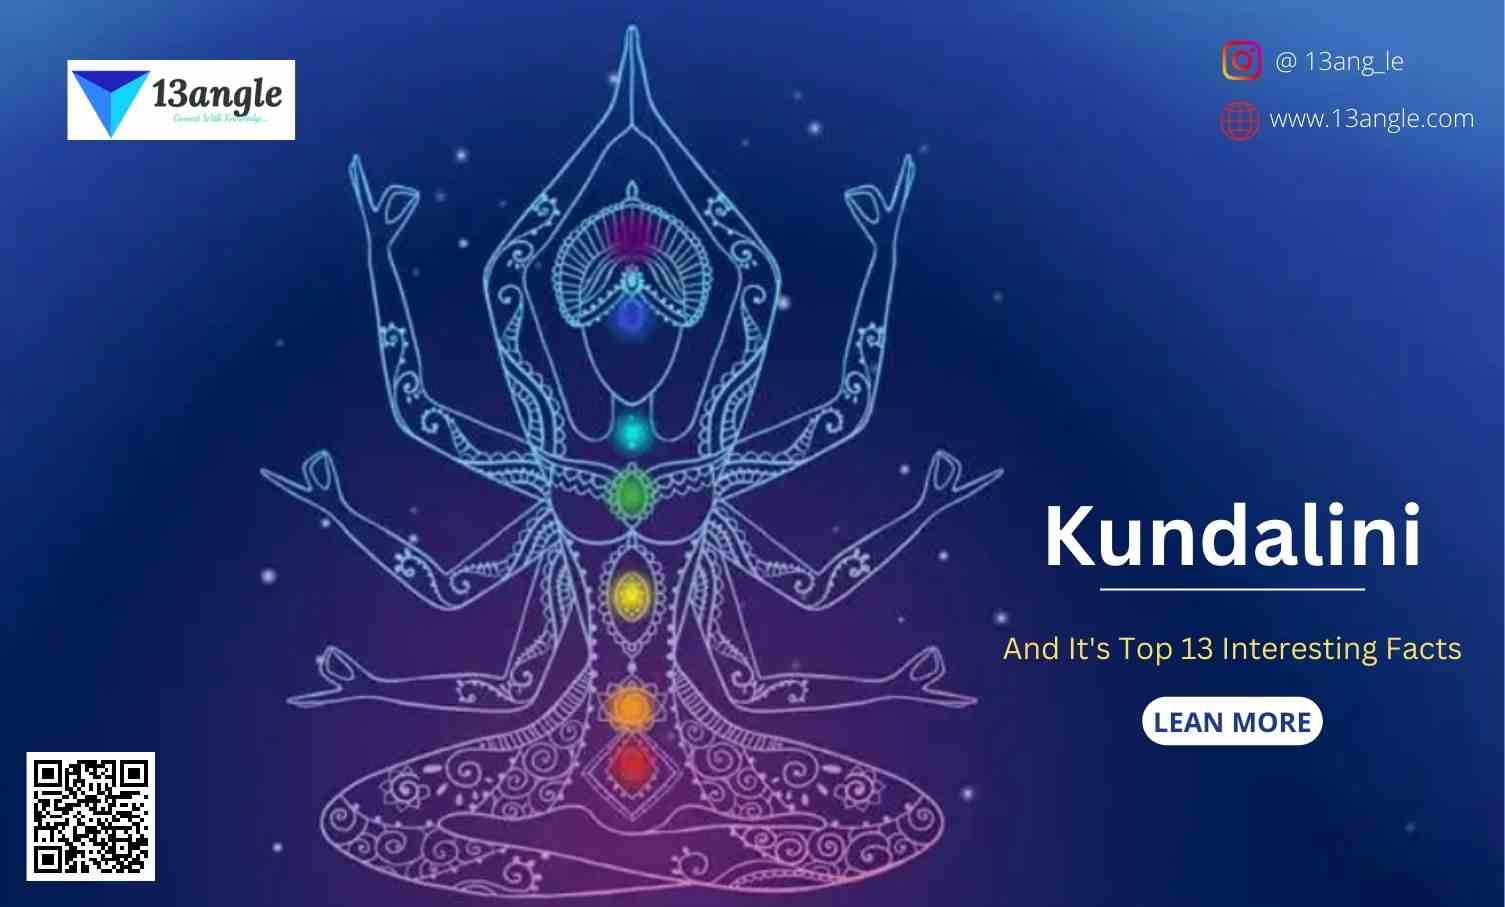 Kundalini And It's Top 13 Interesting Facts- 13angle.com